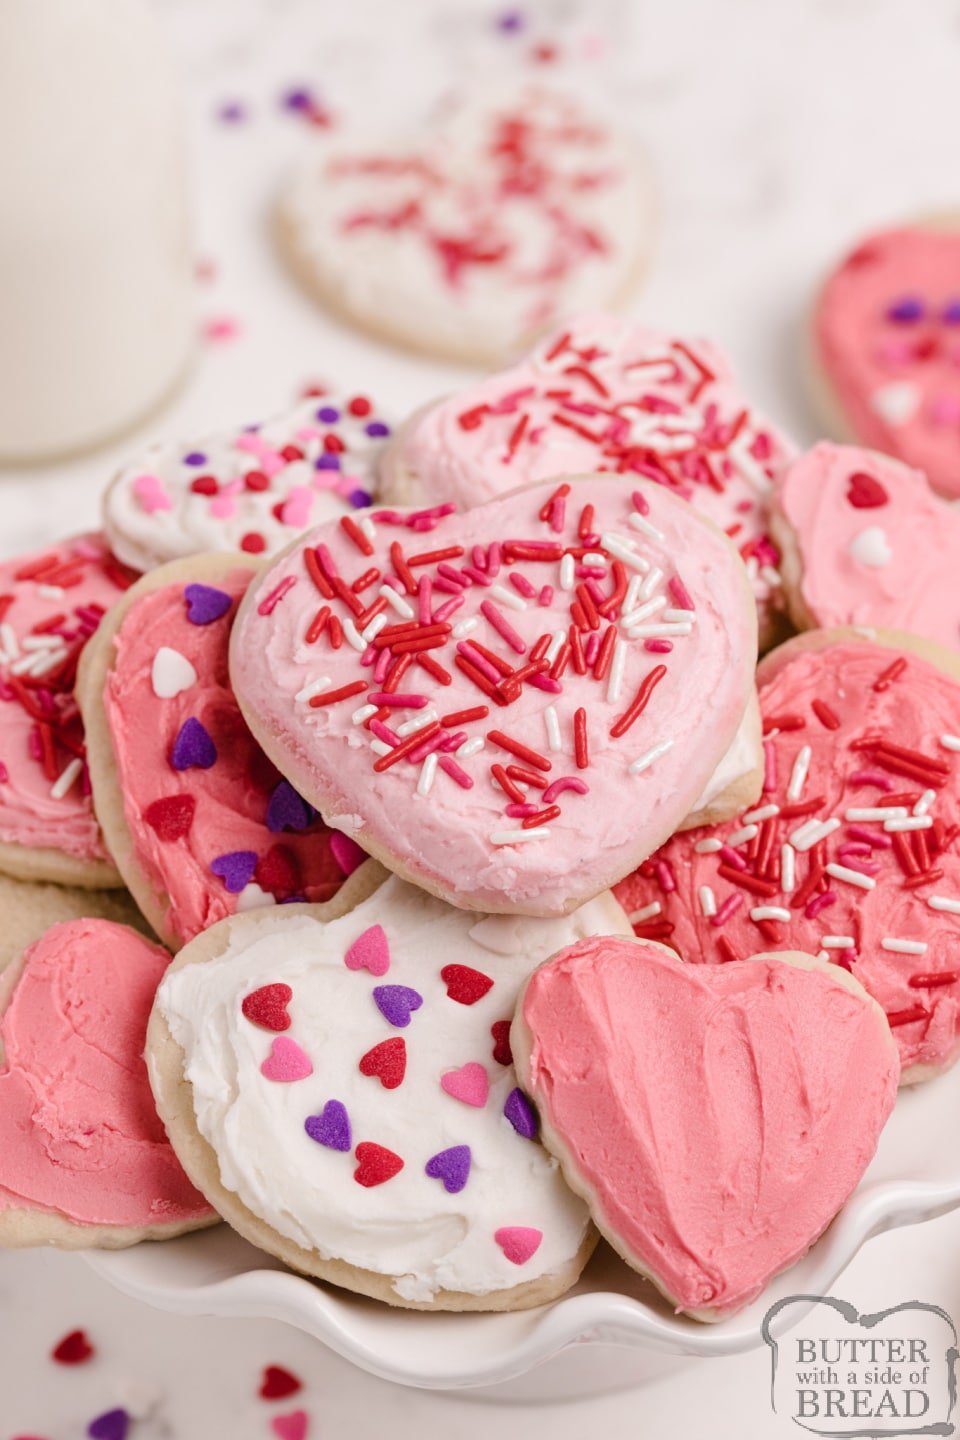 Valentines Sugar Cookies are soft, thick and easily the best sugar cookie recipe I’ve ever tried. These cream cheese sugar cookies are perfectly sweet and they hold their shape when baked!